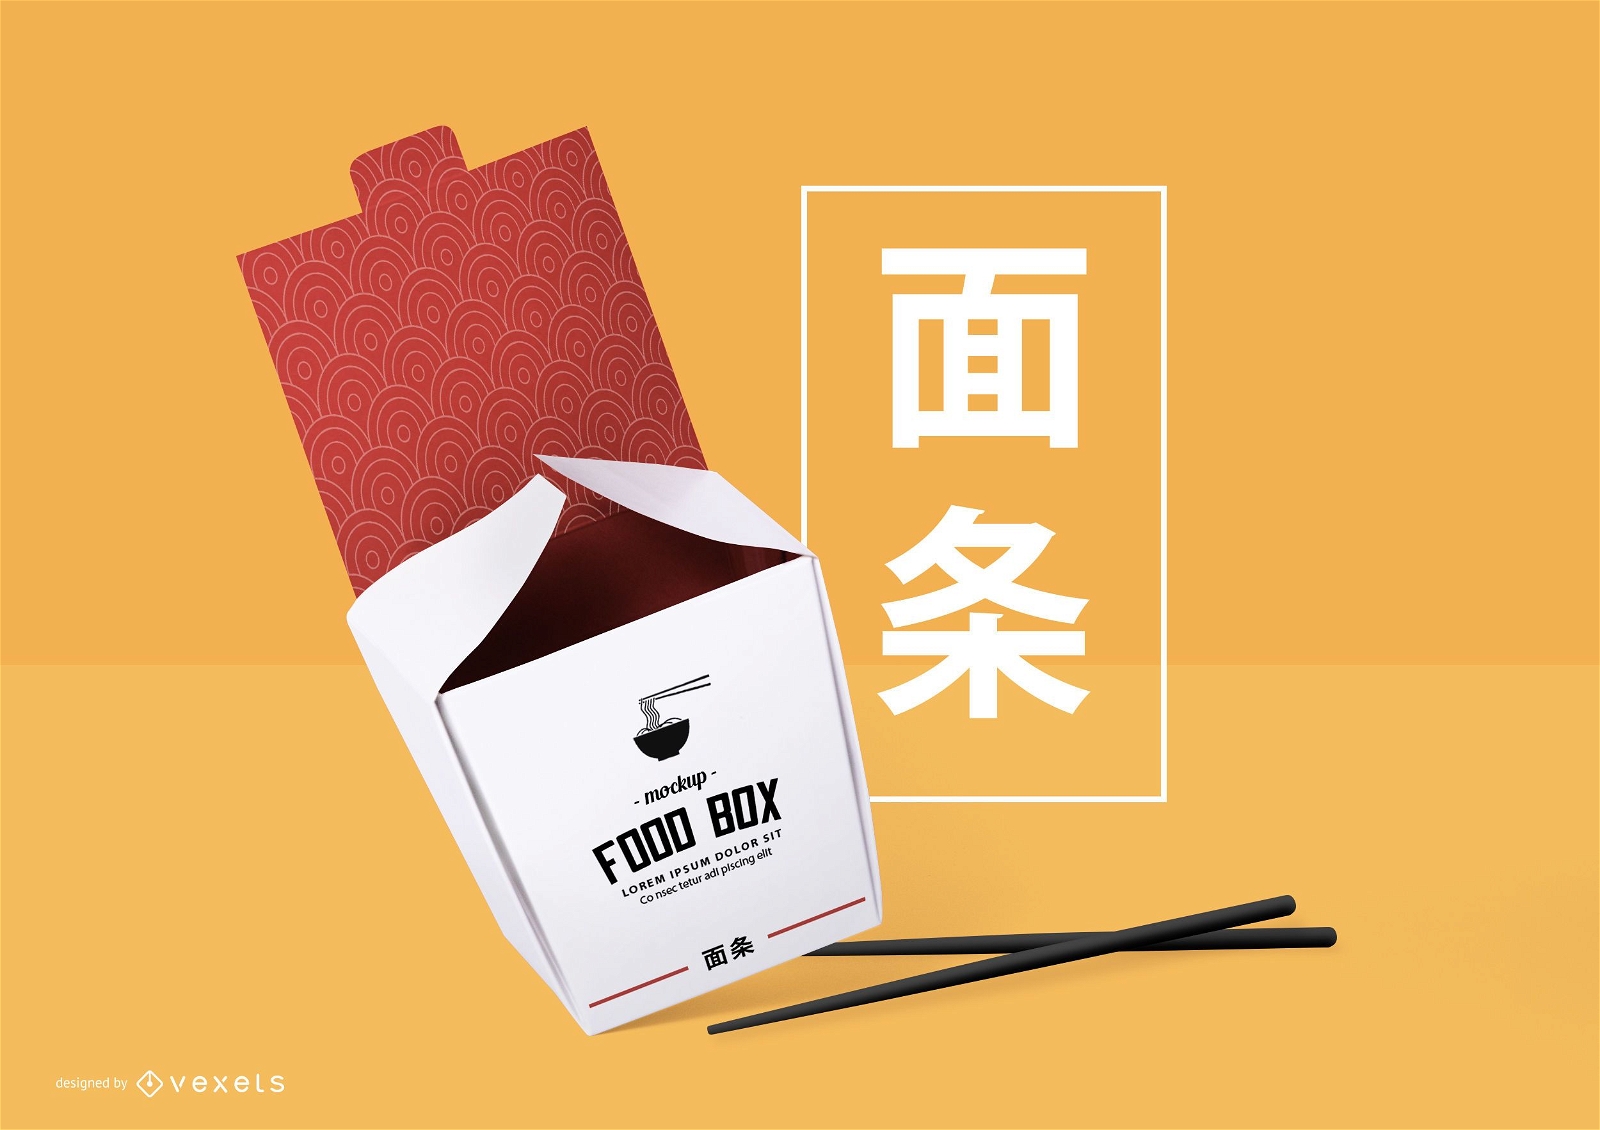 Takeout Container PNG Images & PSDs for Download